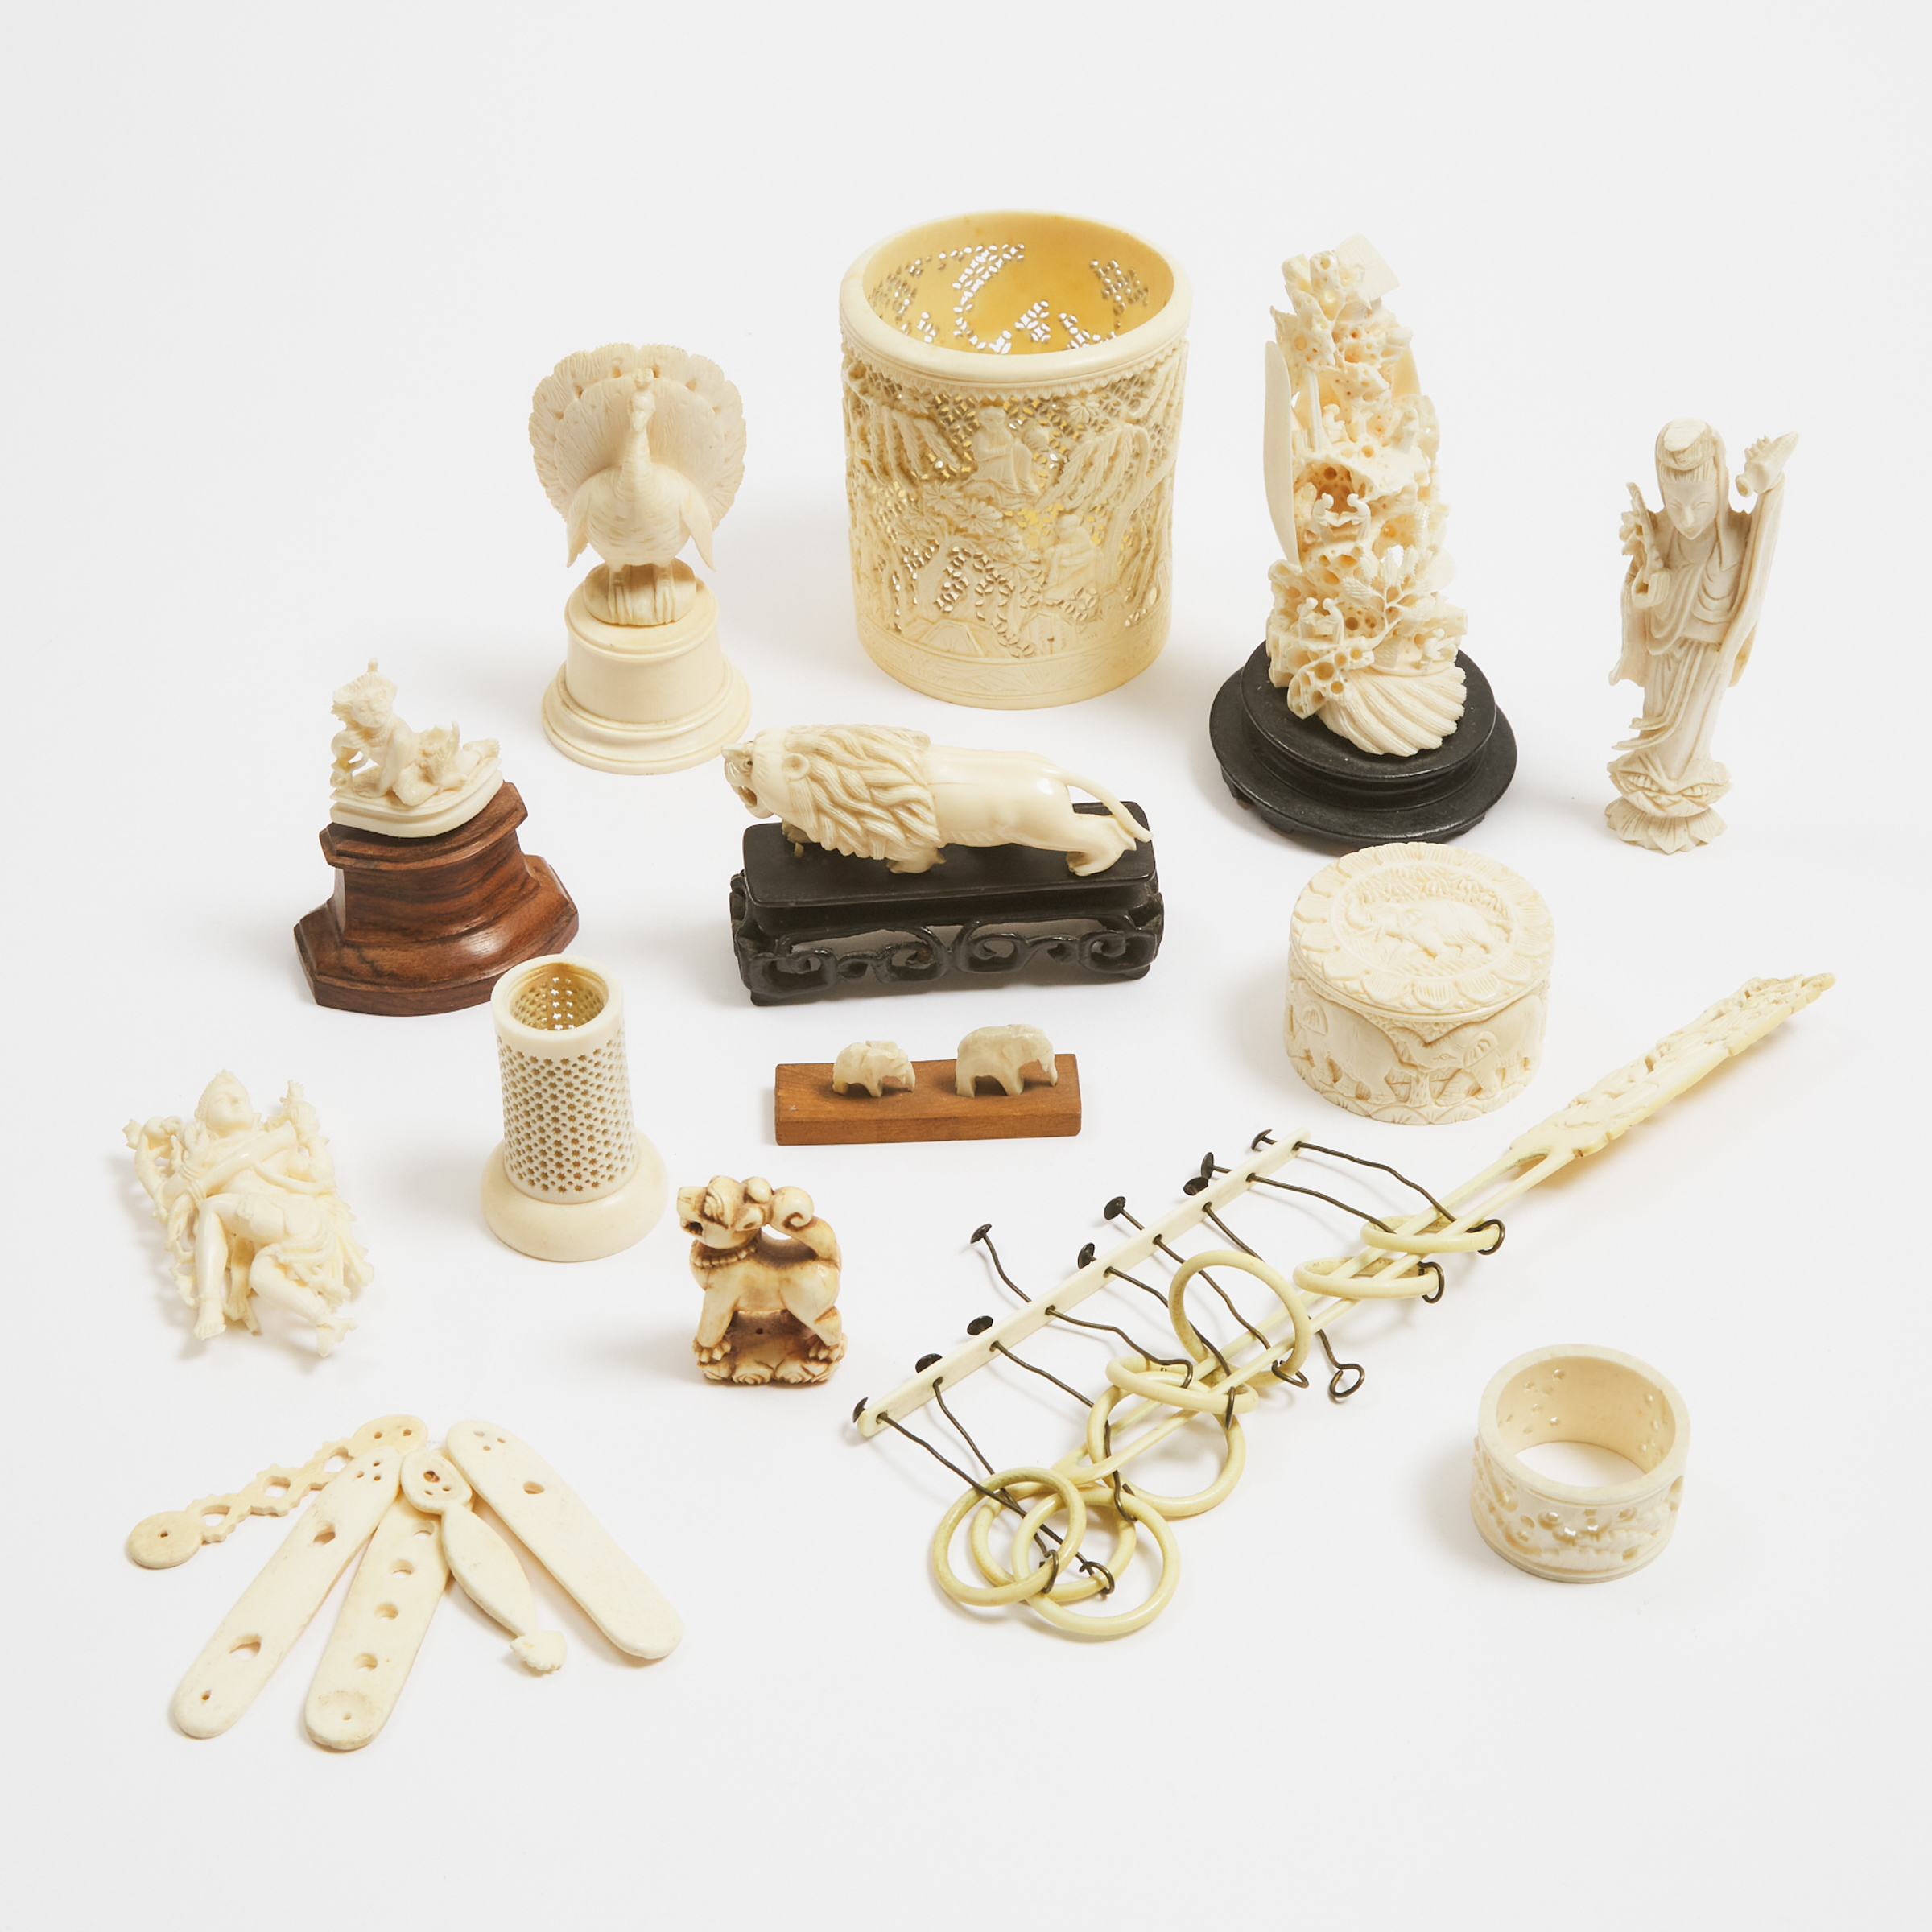 A Large Group of Fourteen Chinese, Indian, and Other Miscellaneous Ivory Carvings, 19th/Early 20th Century